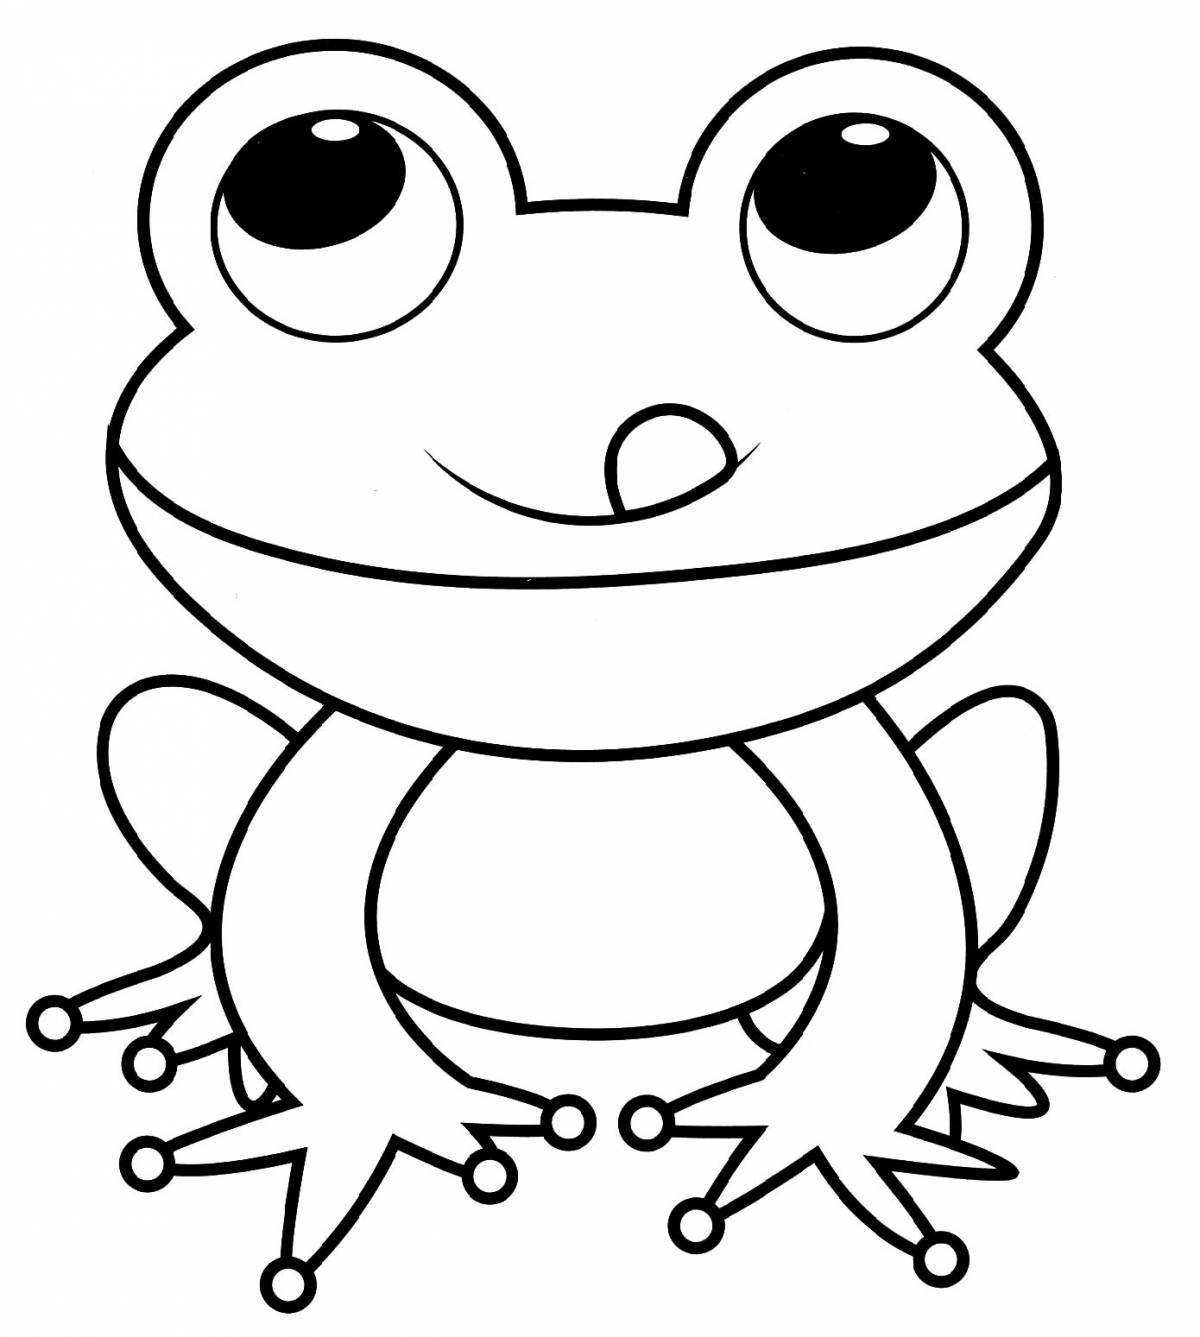 Coloring frog for children 3-4 years old